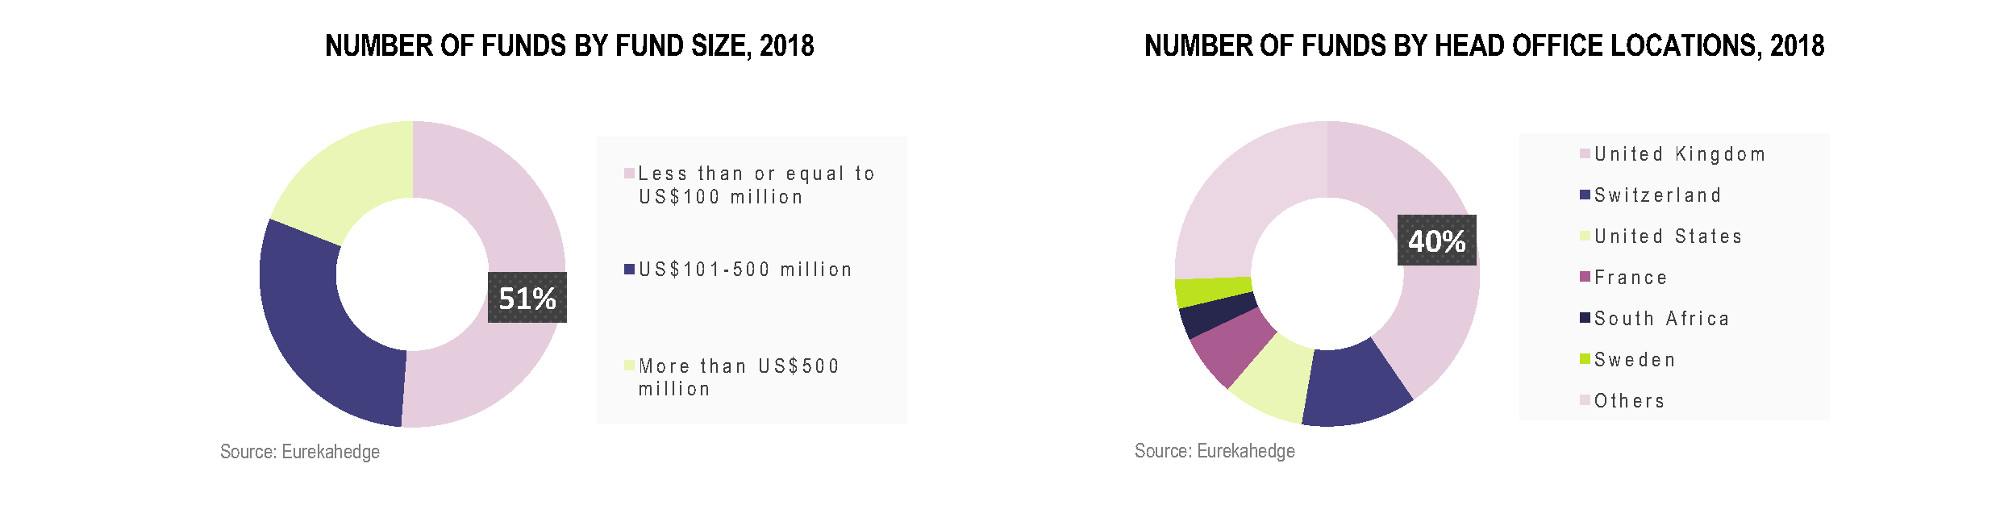 European Hedge Funds Infographic July 2018 - number of funds by fund size, number of funds by head office locations